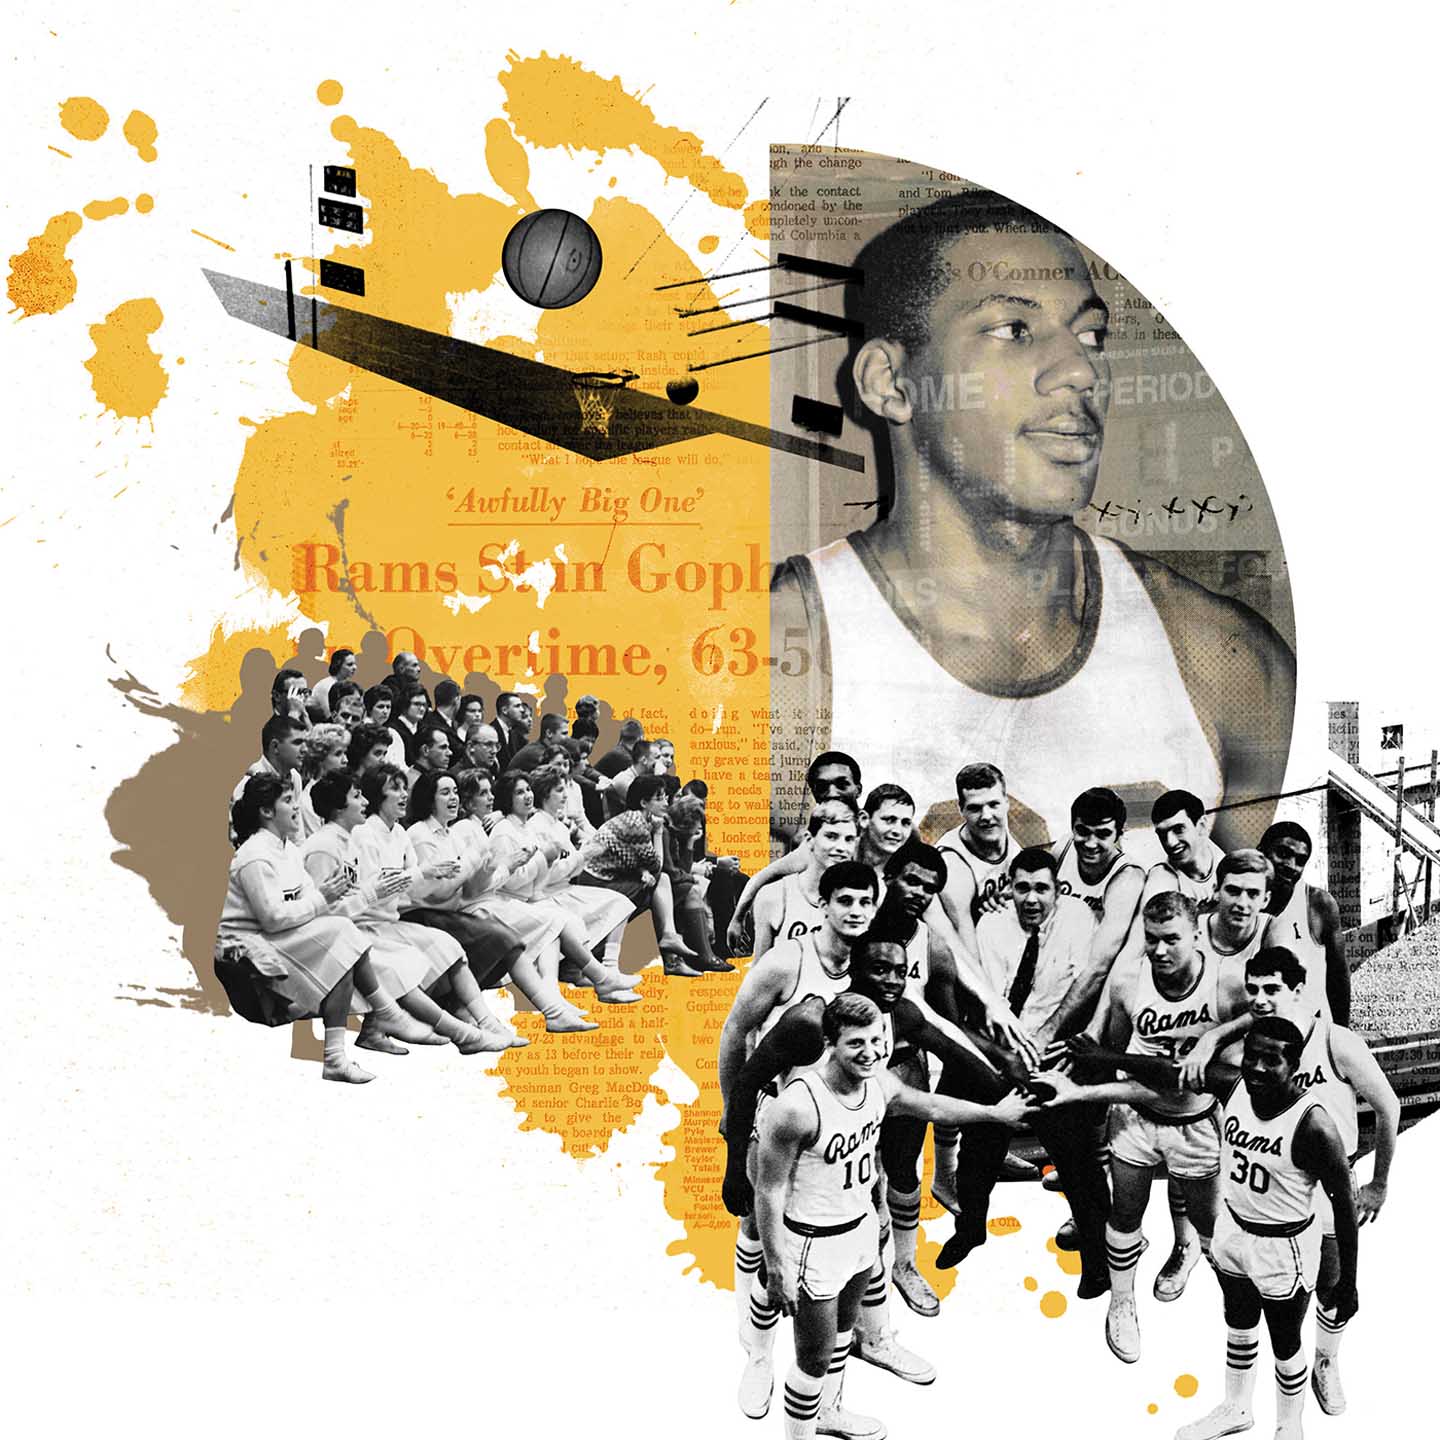 Collage of photos of basketball players from the 1960s and 70s and fans attending basketball games